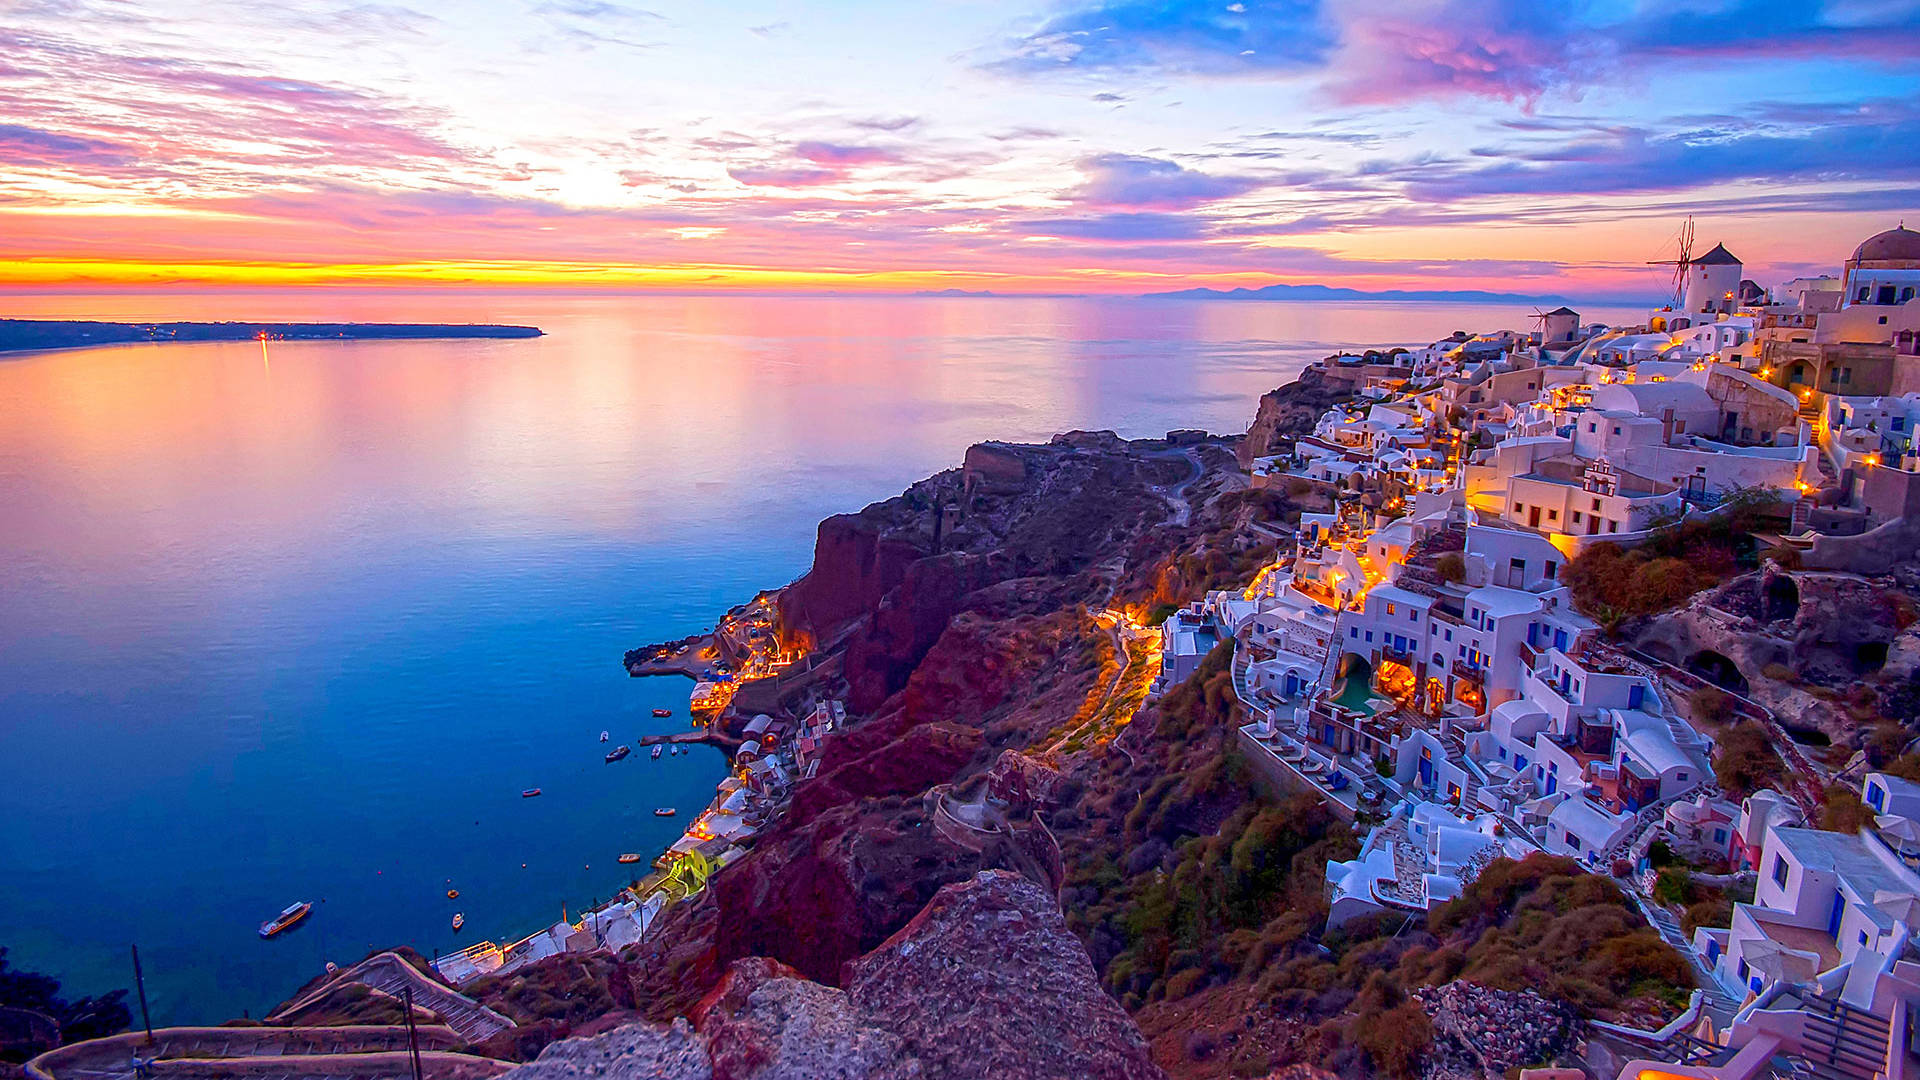 
Panoramic view of mesmerizing Santorini: Infinite blue of the sea meets the lush green craters of the island, creating an unforgettable image.